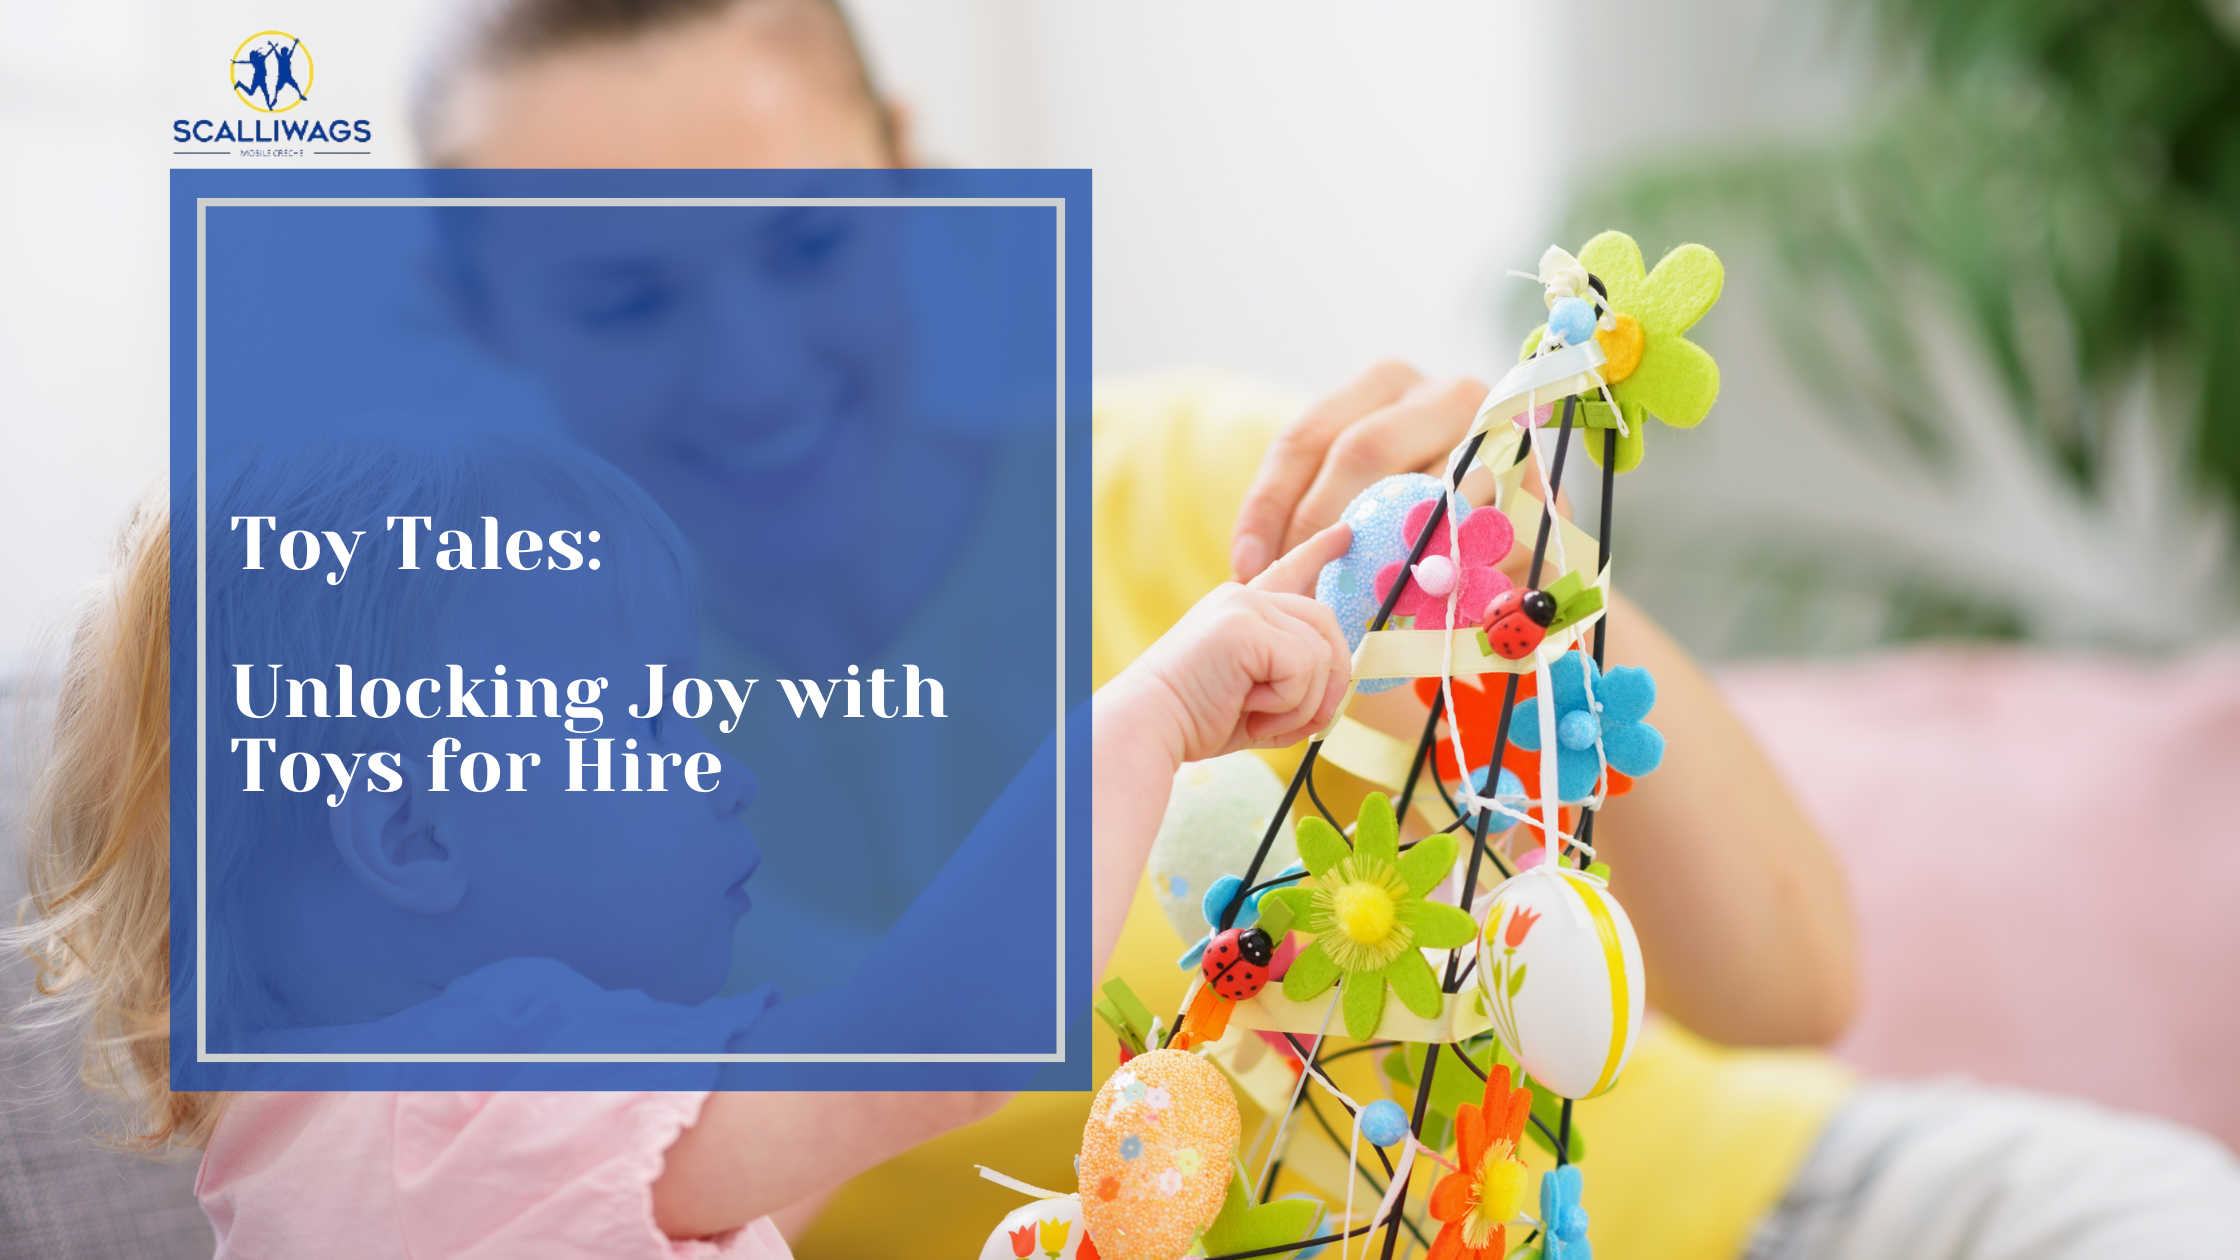 Toy Tales: Unlocking Joy with Toys for Hire